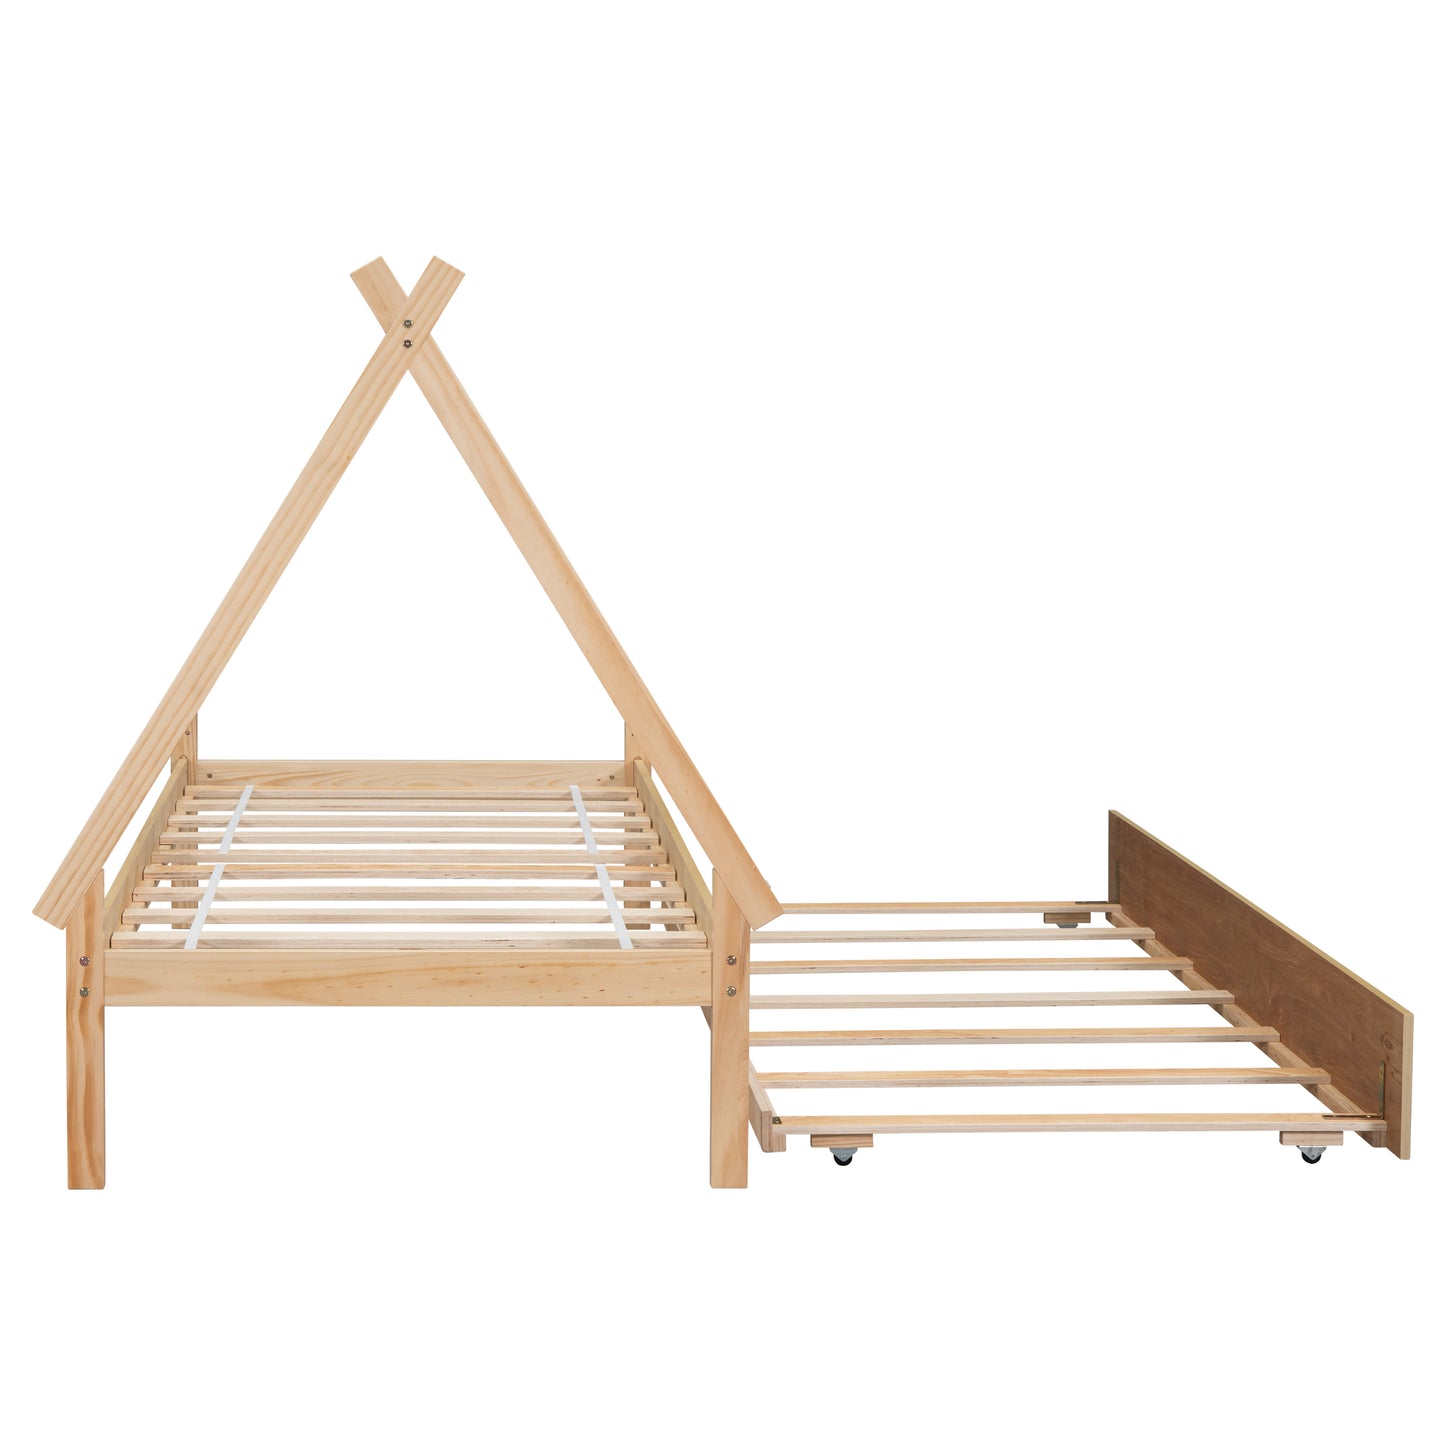 Twin size Tent Floor Platform Bed, Teepee Bed, with Trundle, Natural